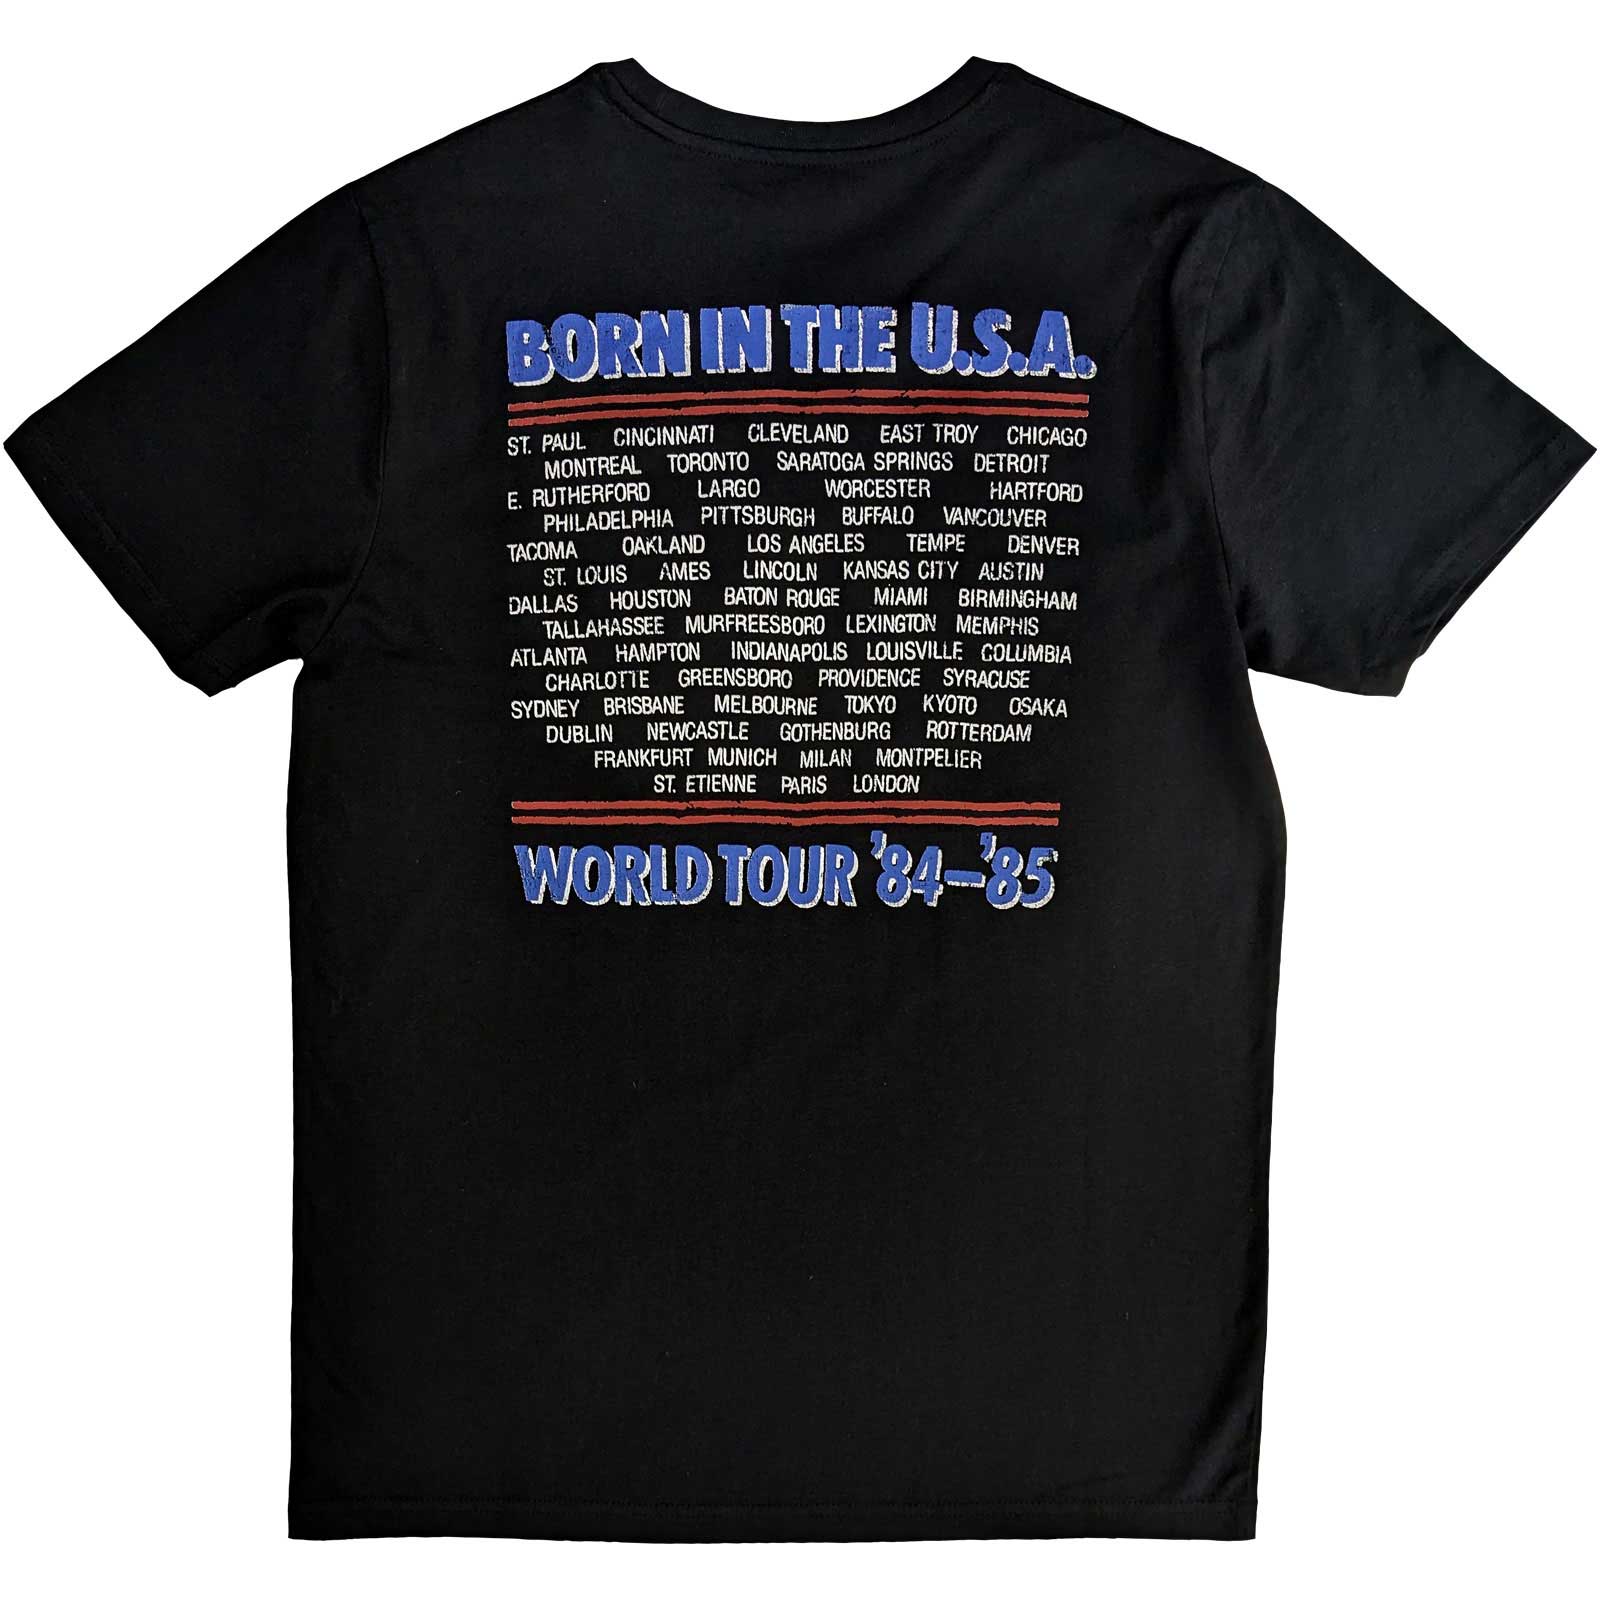 Bruce Springsteen T-Shirt - Born in the USA '85 World Tour (Back Print) - Conception unisexe sous licence officielle